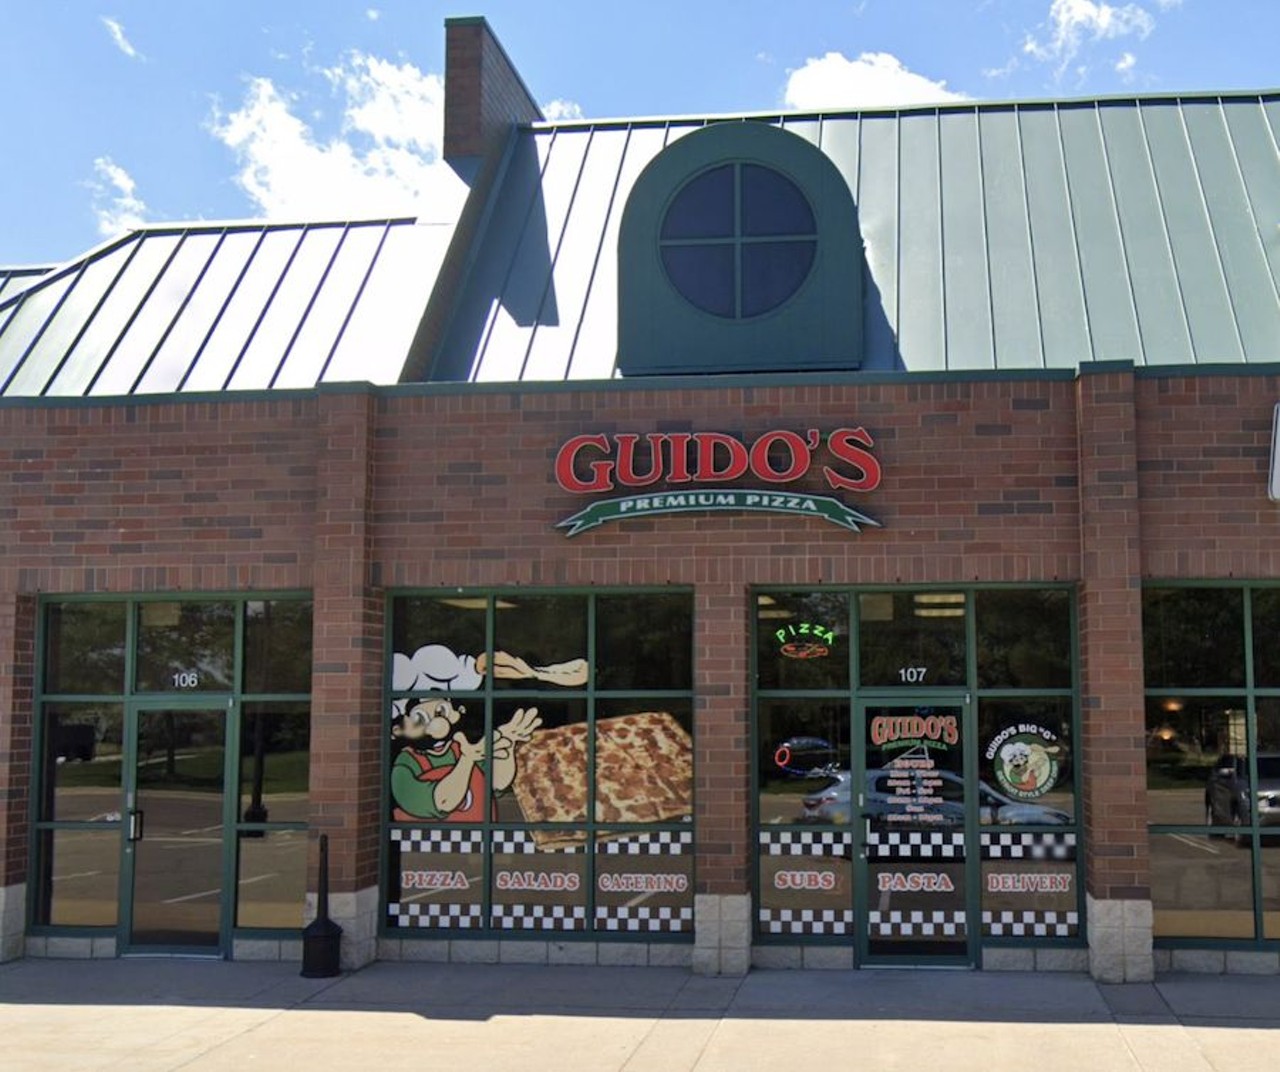 Guido&#146;s Premium Pizza
Various locations; guidospizza.com
Guido&#146;s touts itself as &#147;The Savory Sauce Boss,&#148; a nickname for its variety of signature sauces. From its original recipe blend of spices, to its spicy fire roasted hot sauce, Guido&#146;s Premium Pizza delivers crispy deep dish-style pizzas with a spicy kick.
Photo via Google Maps